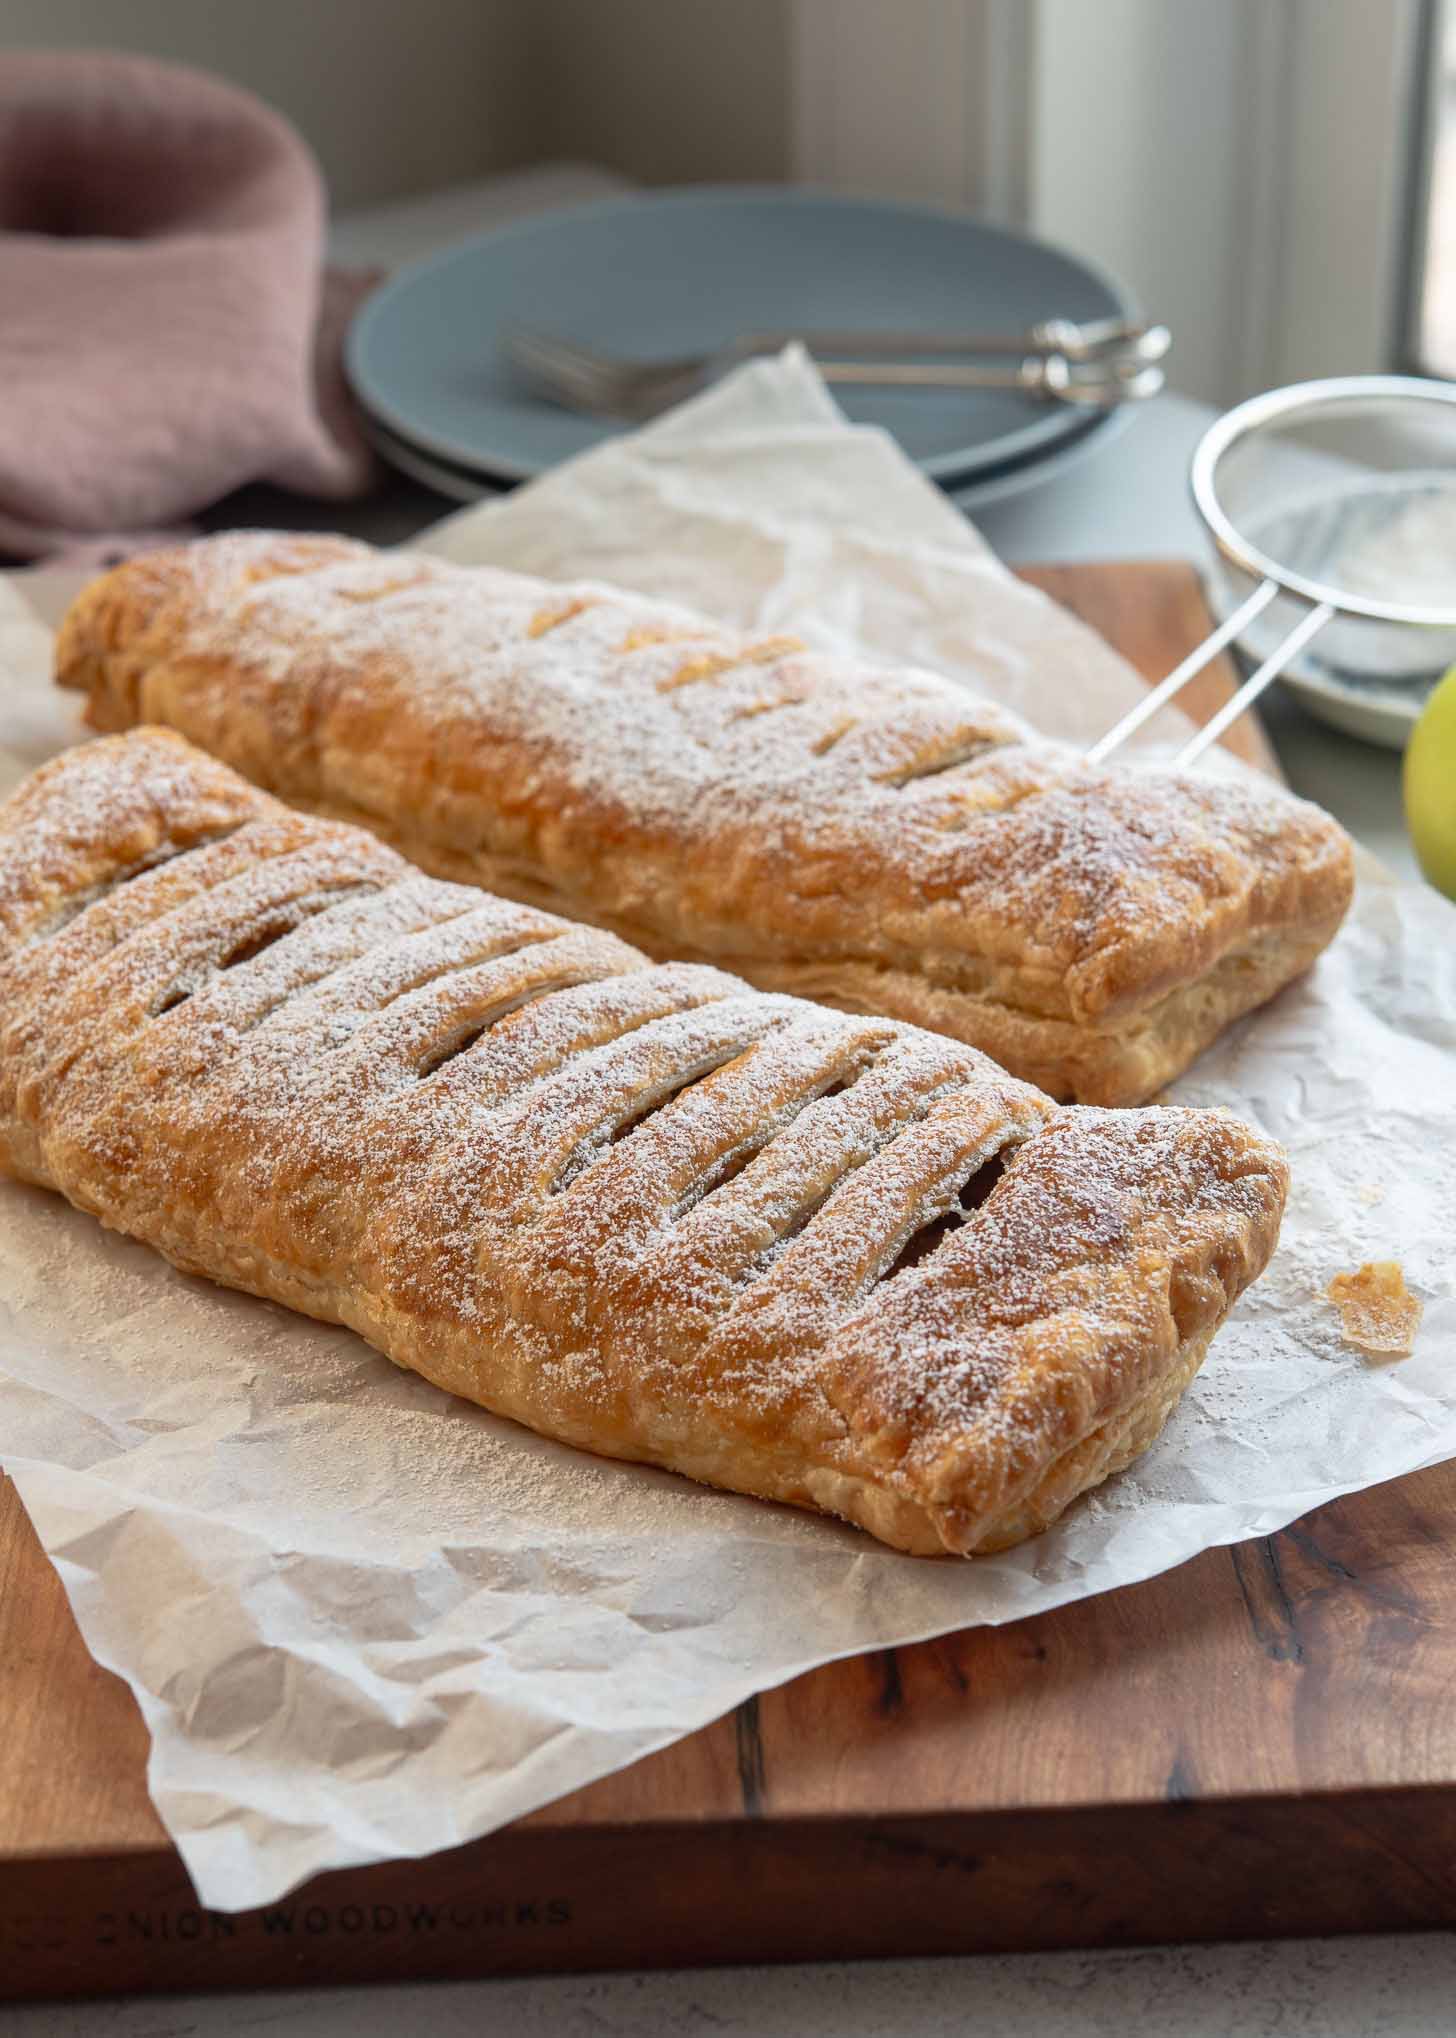 Apple strudel made with puff pastry.